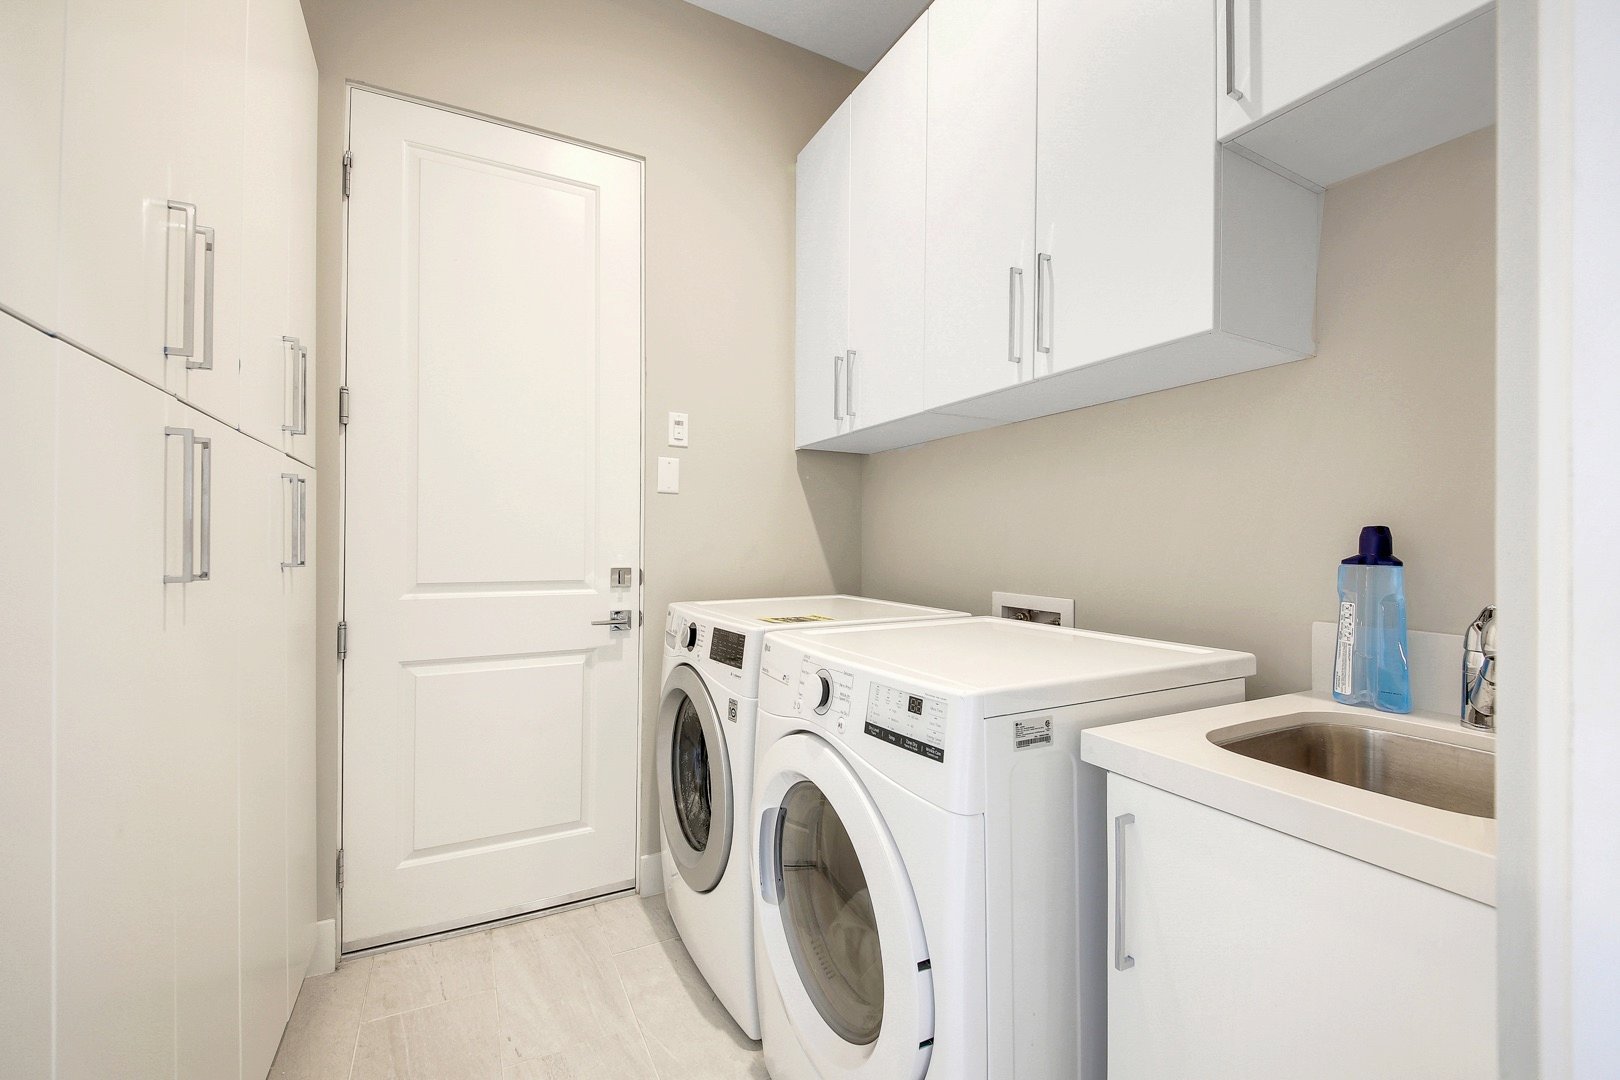 Fully equipped laundry room with washer, dryer, ironing board, and iron.